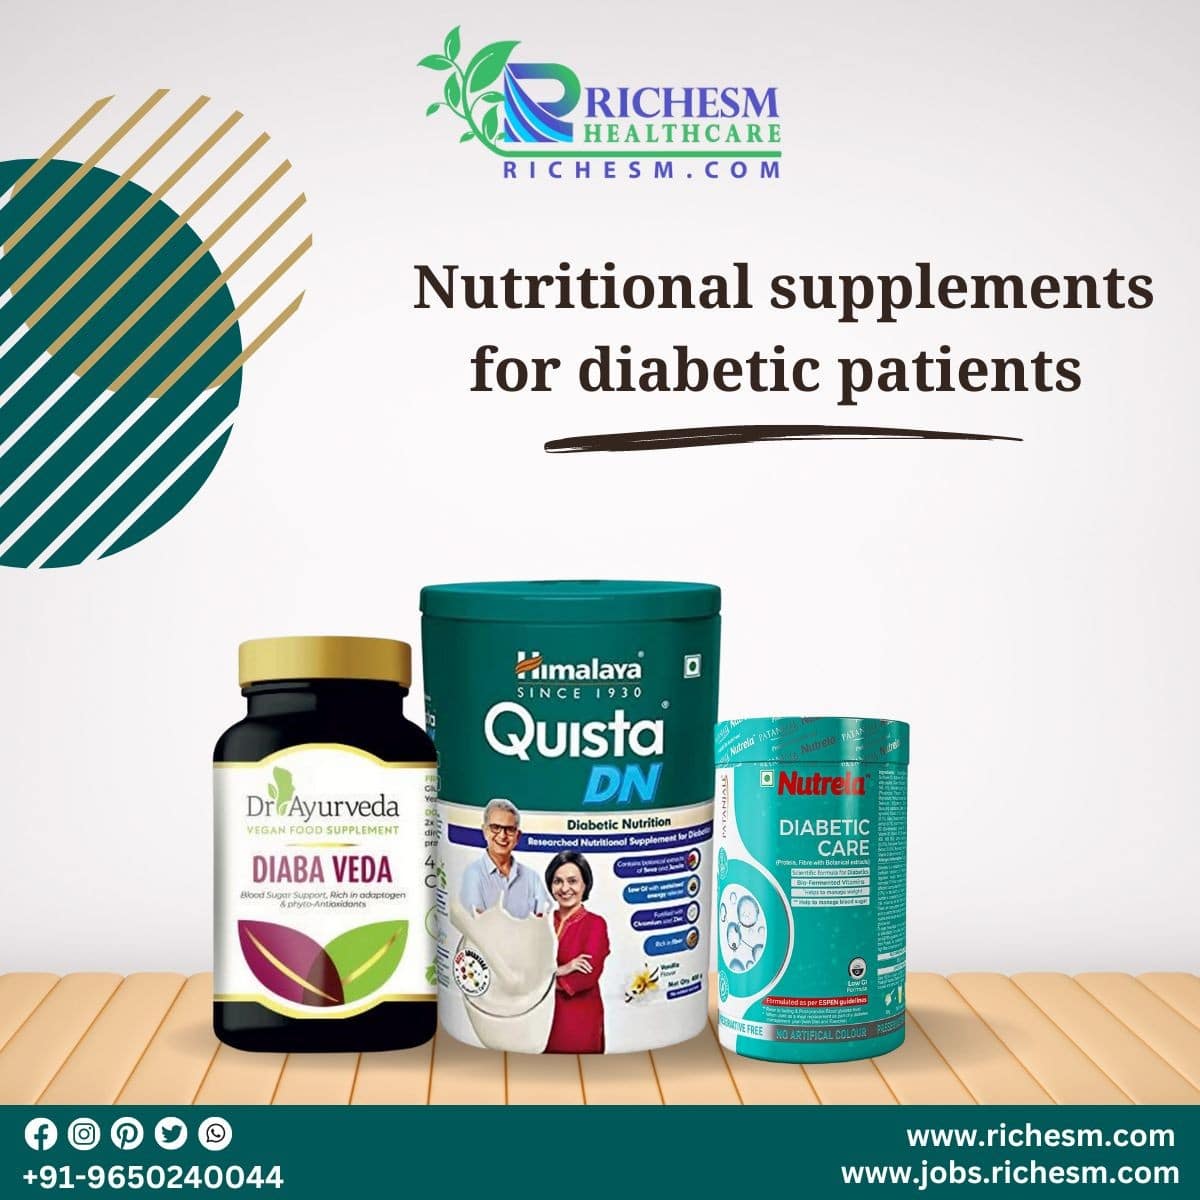 RichesM To Find Nutritional Supplements For Diabetic Patients